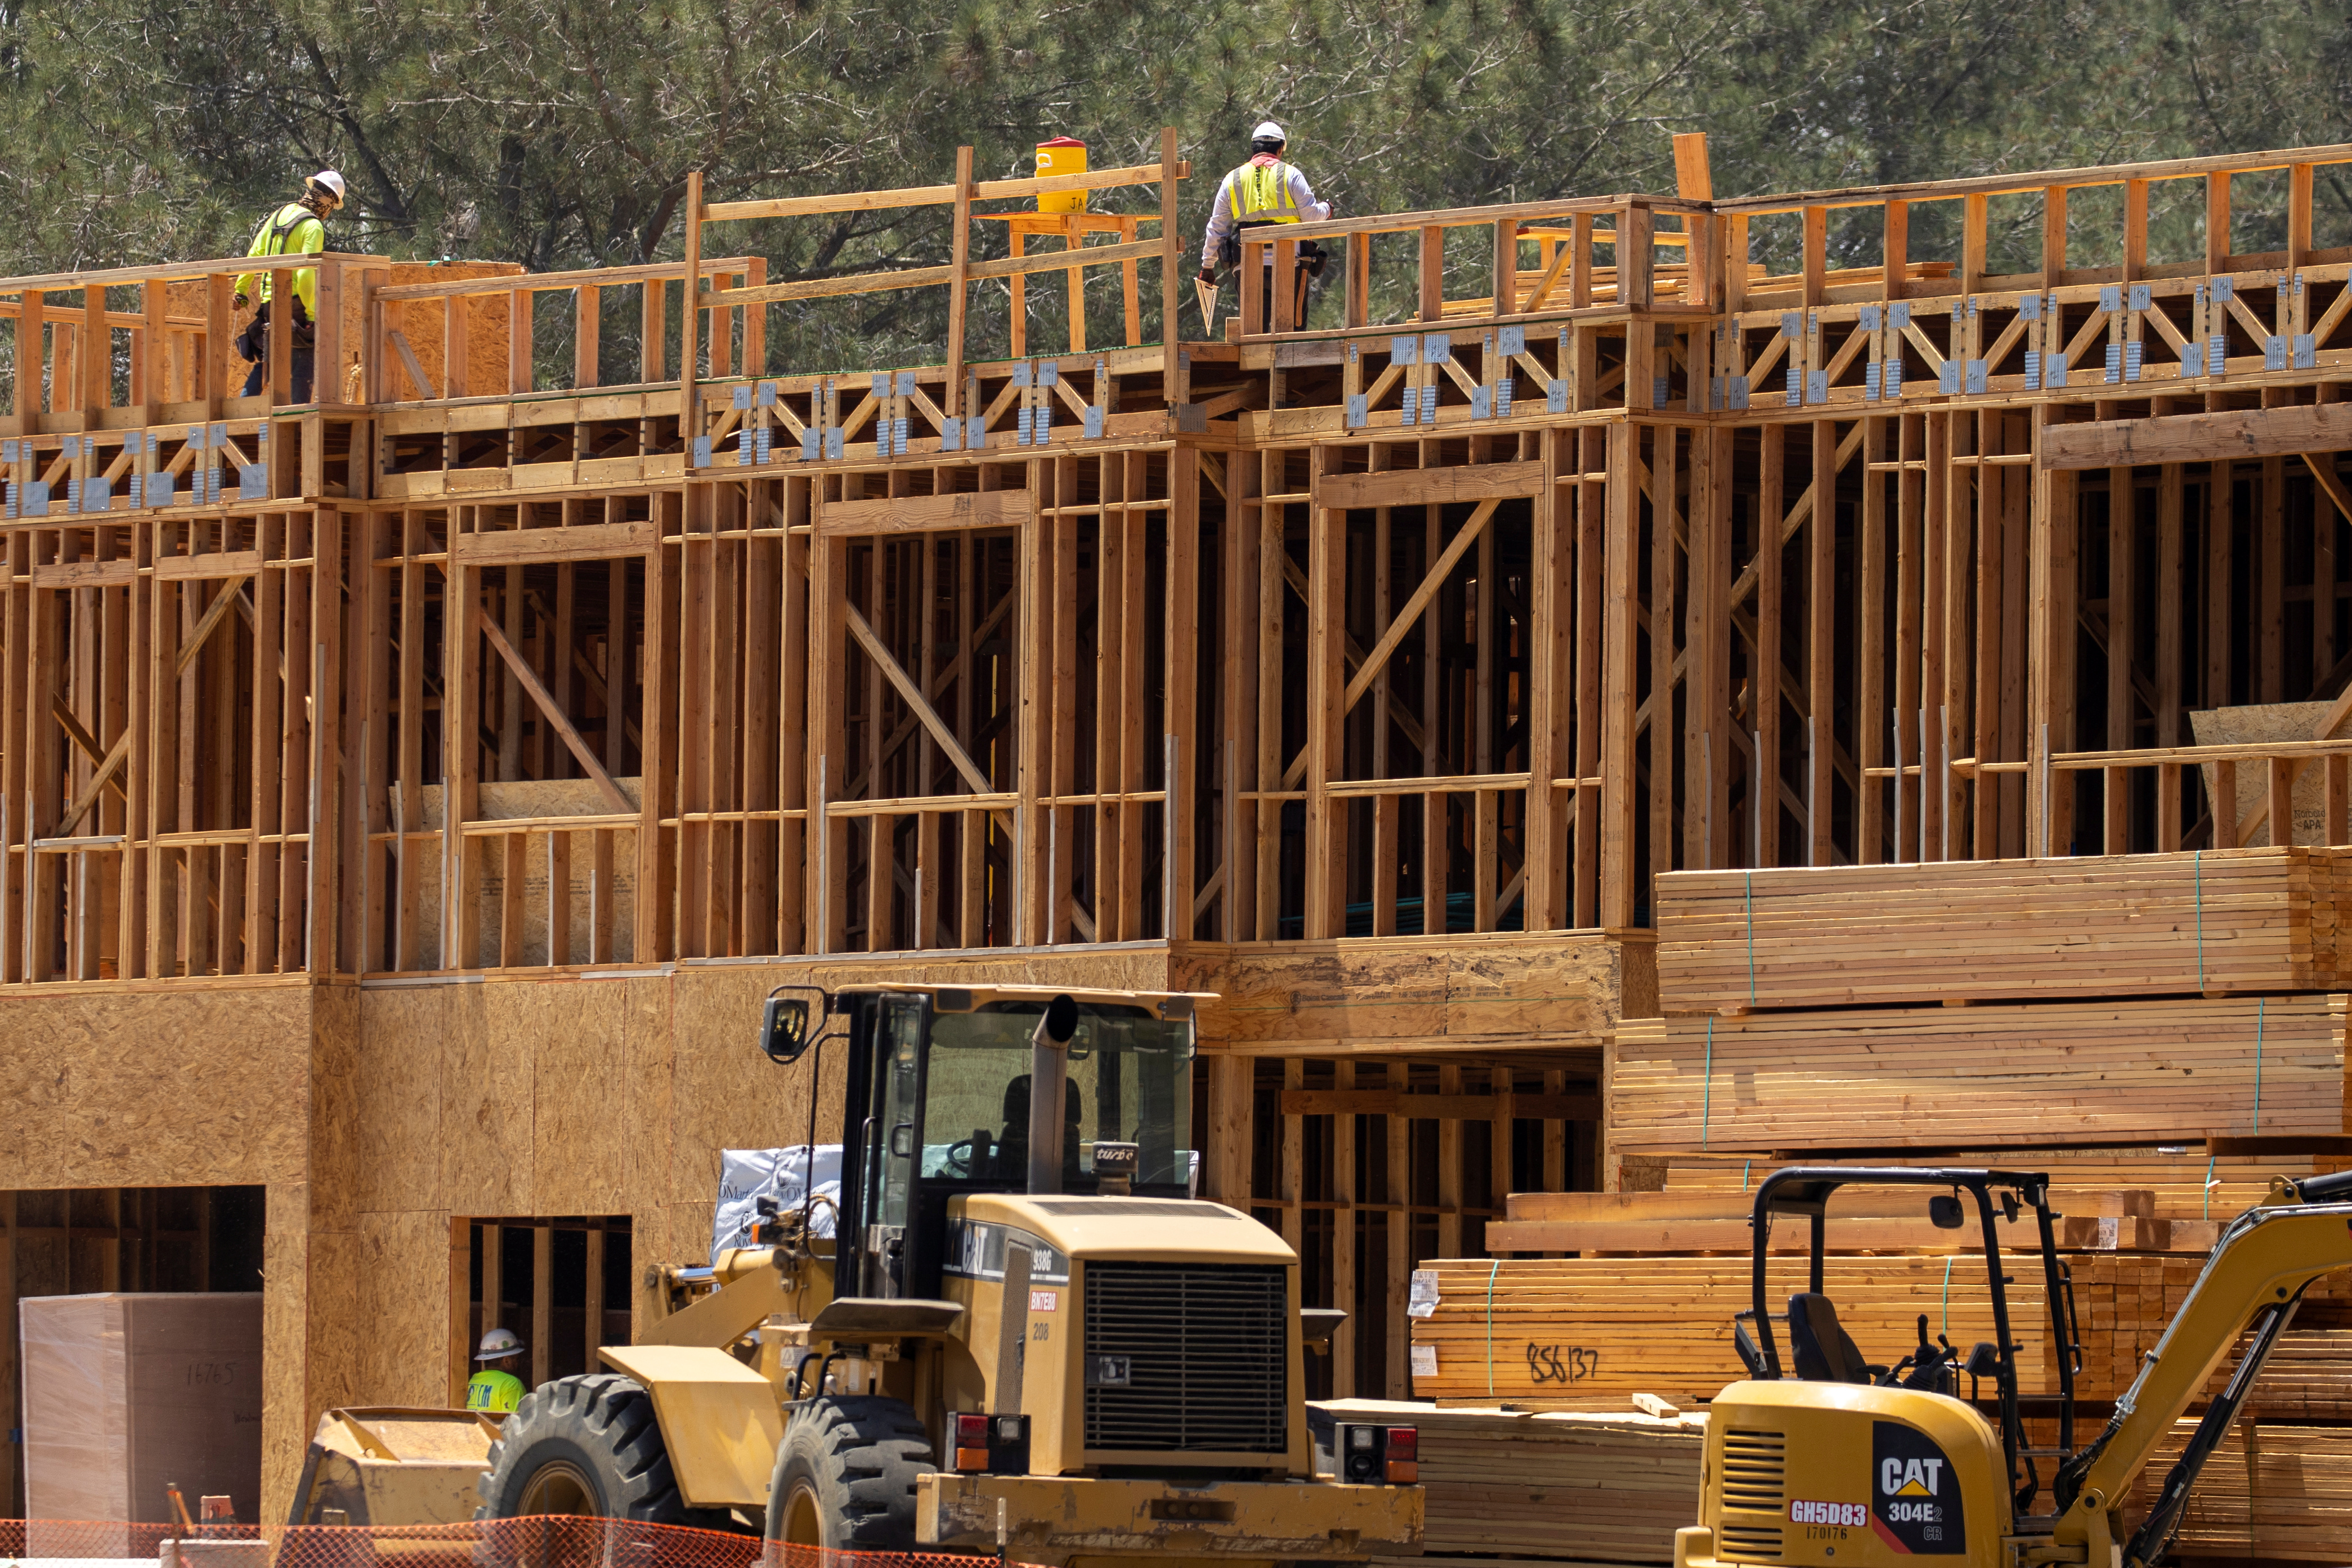 Construction workers on the job at a residential project during the outbreak of the coronavirus disease in California